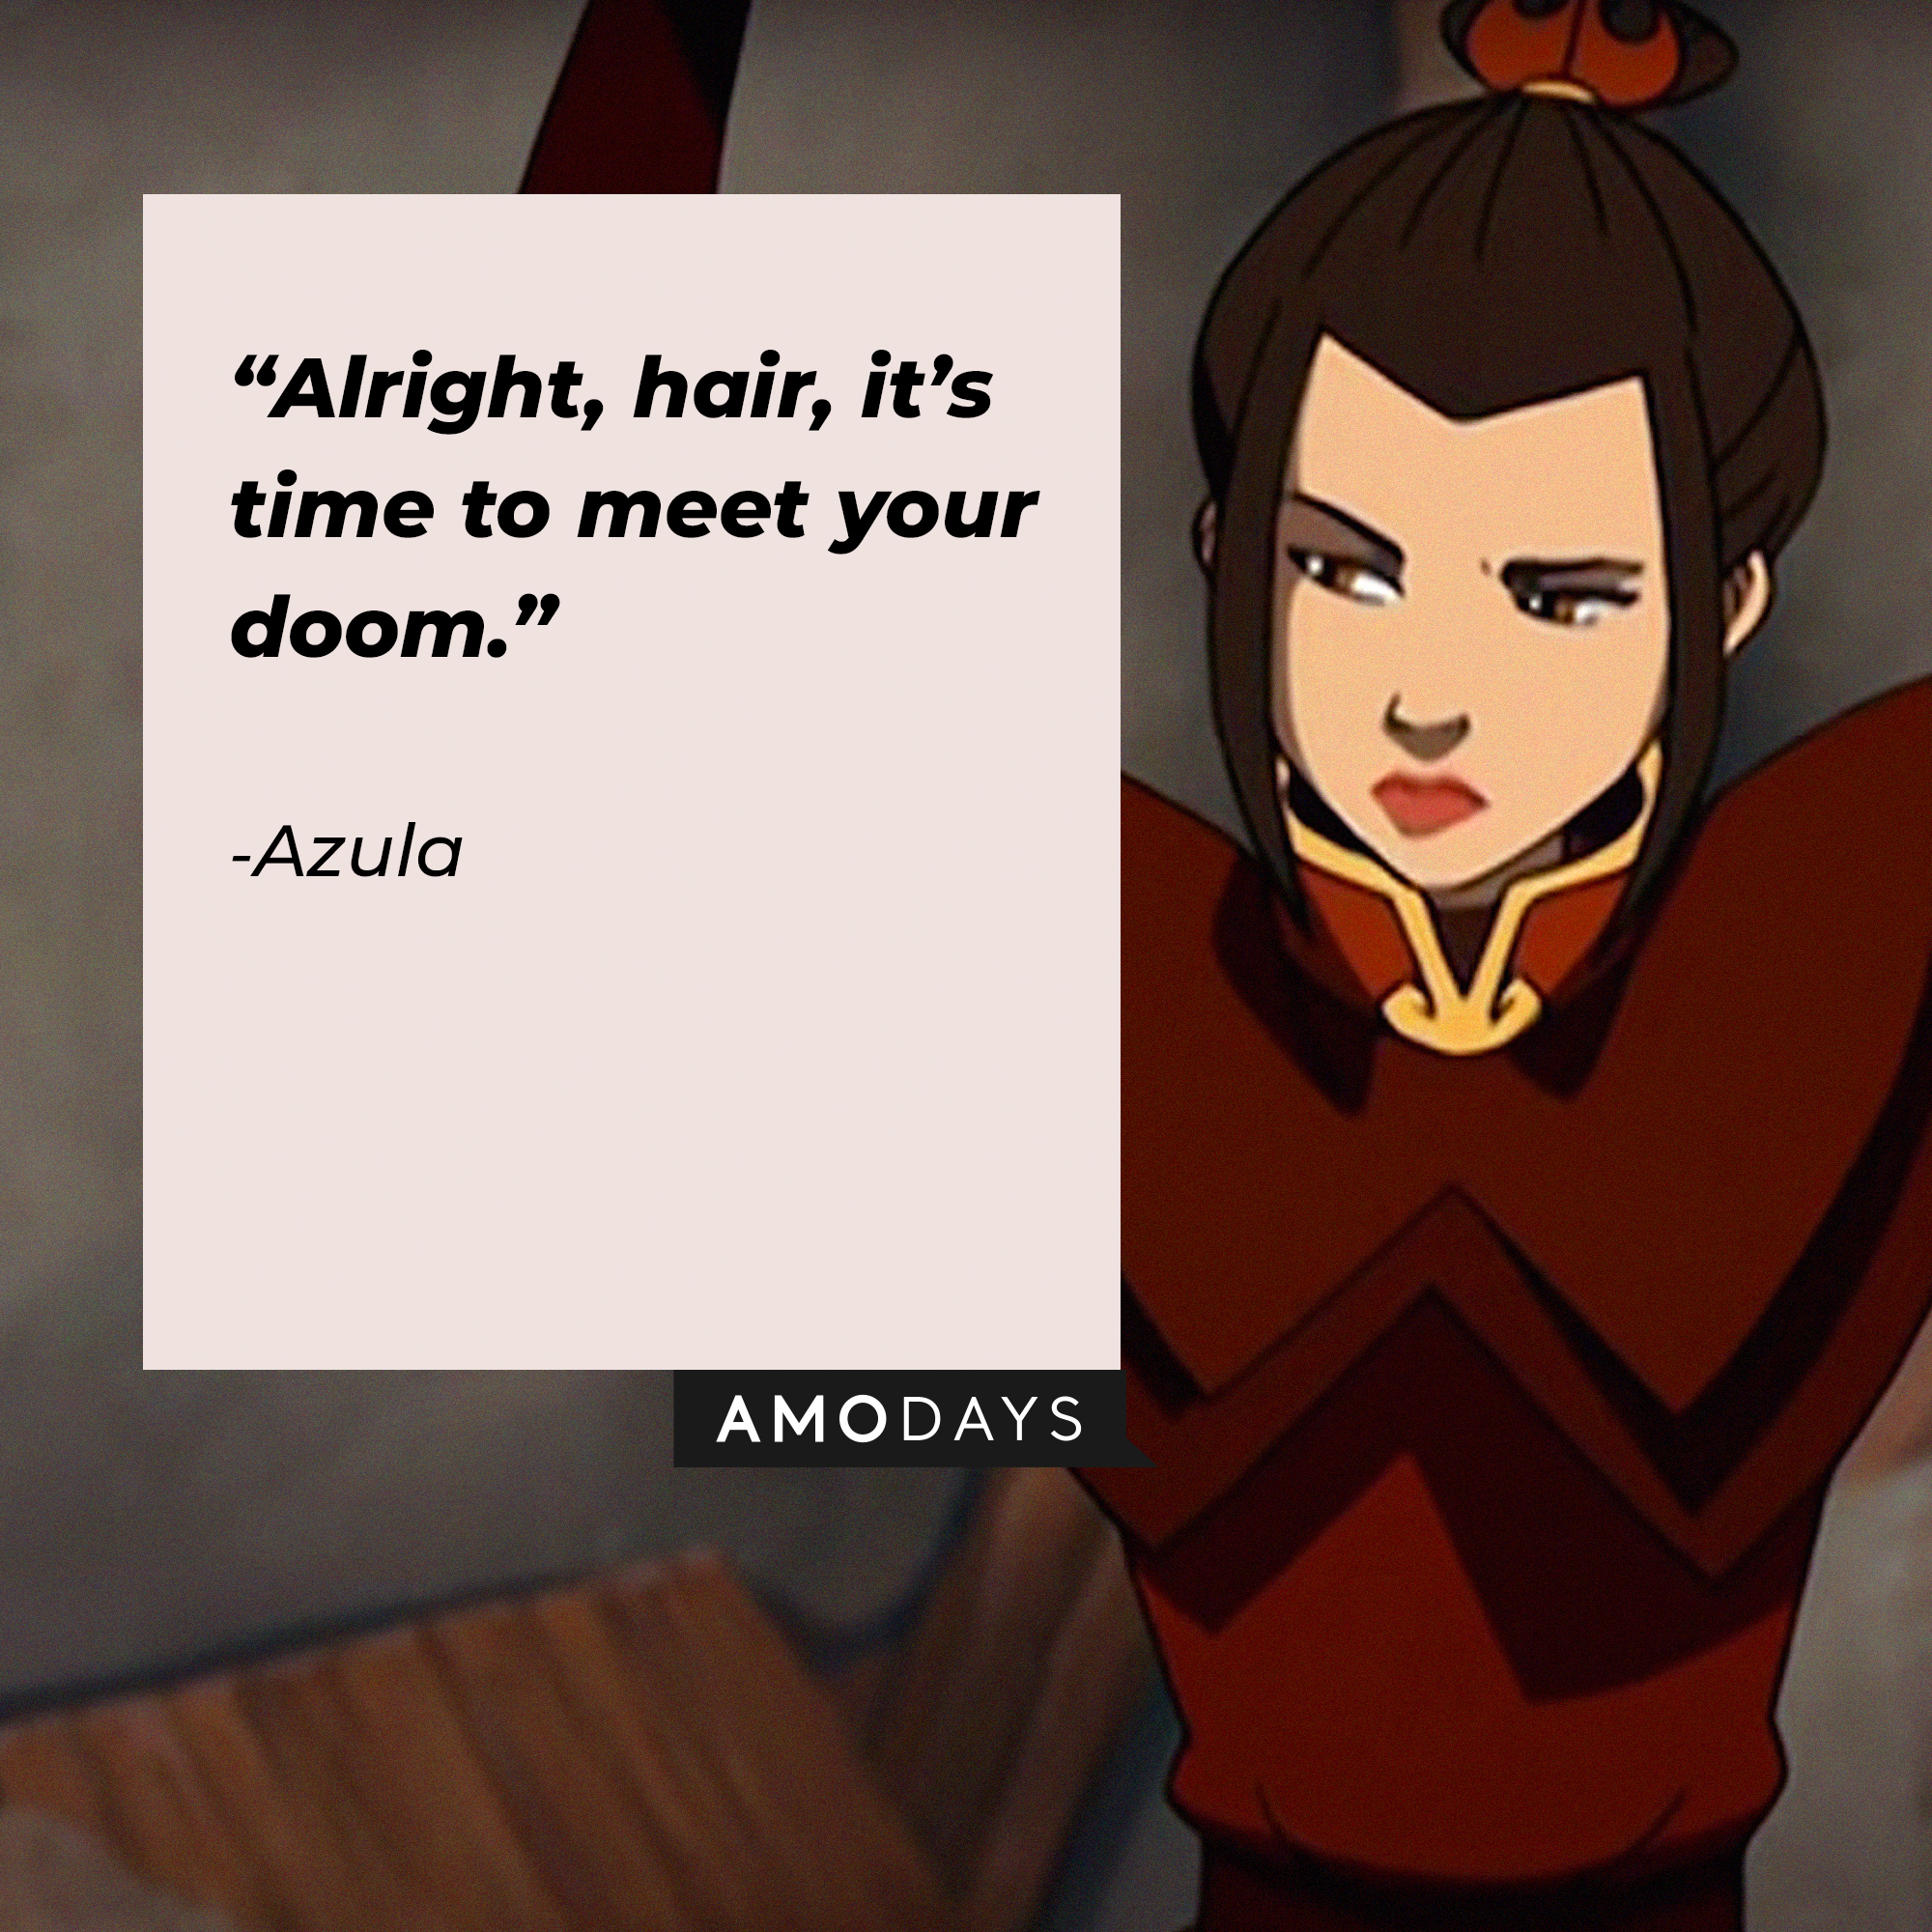 Azula's quote: “Alright, hair, it’s time to meet your doom.” | Source: youtube.com/TeamAvatar